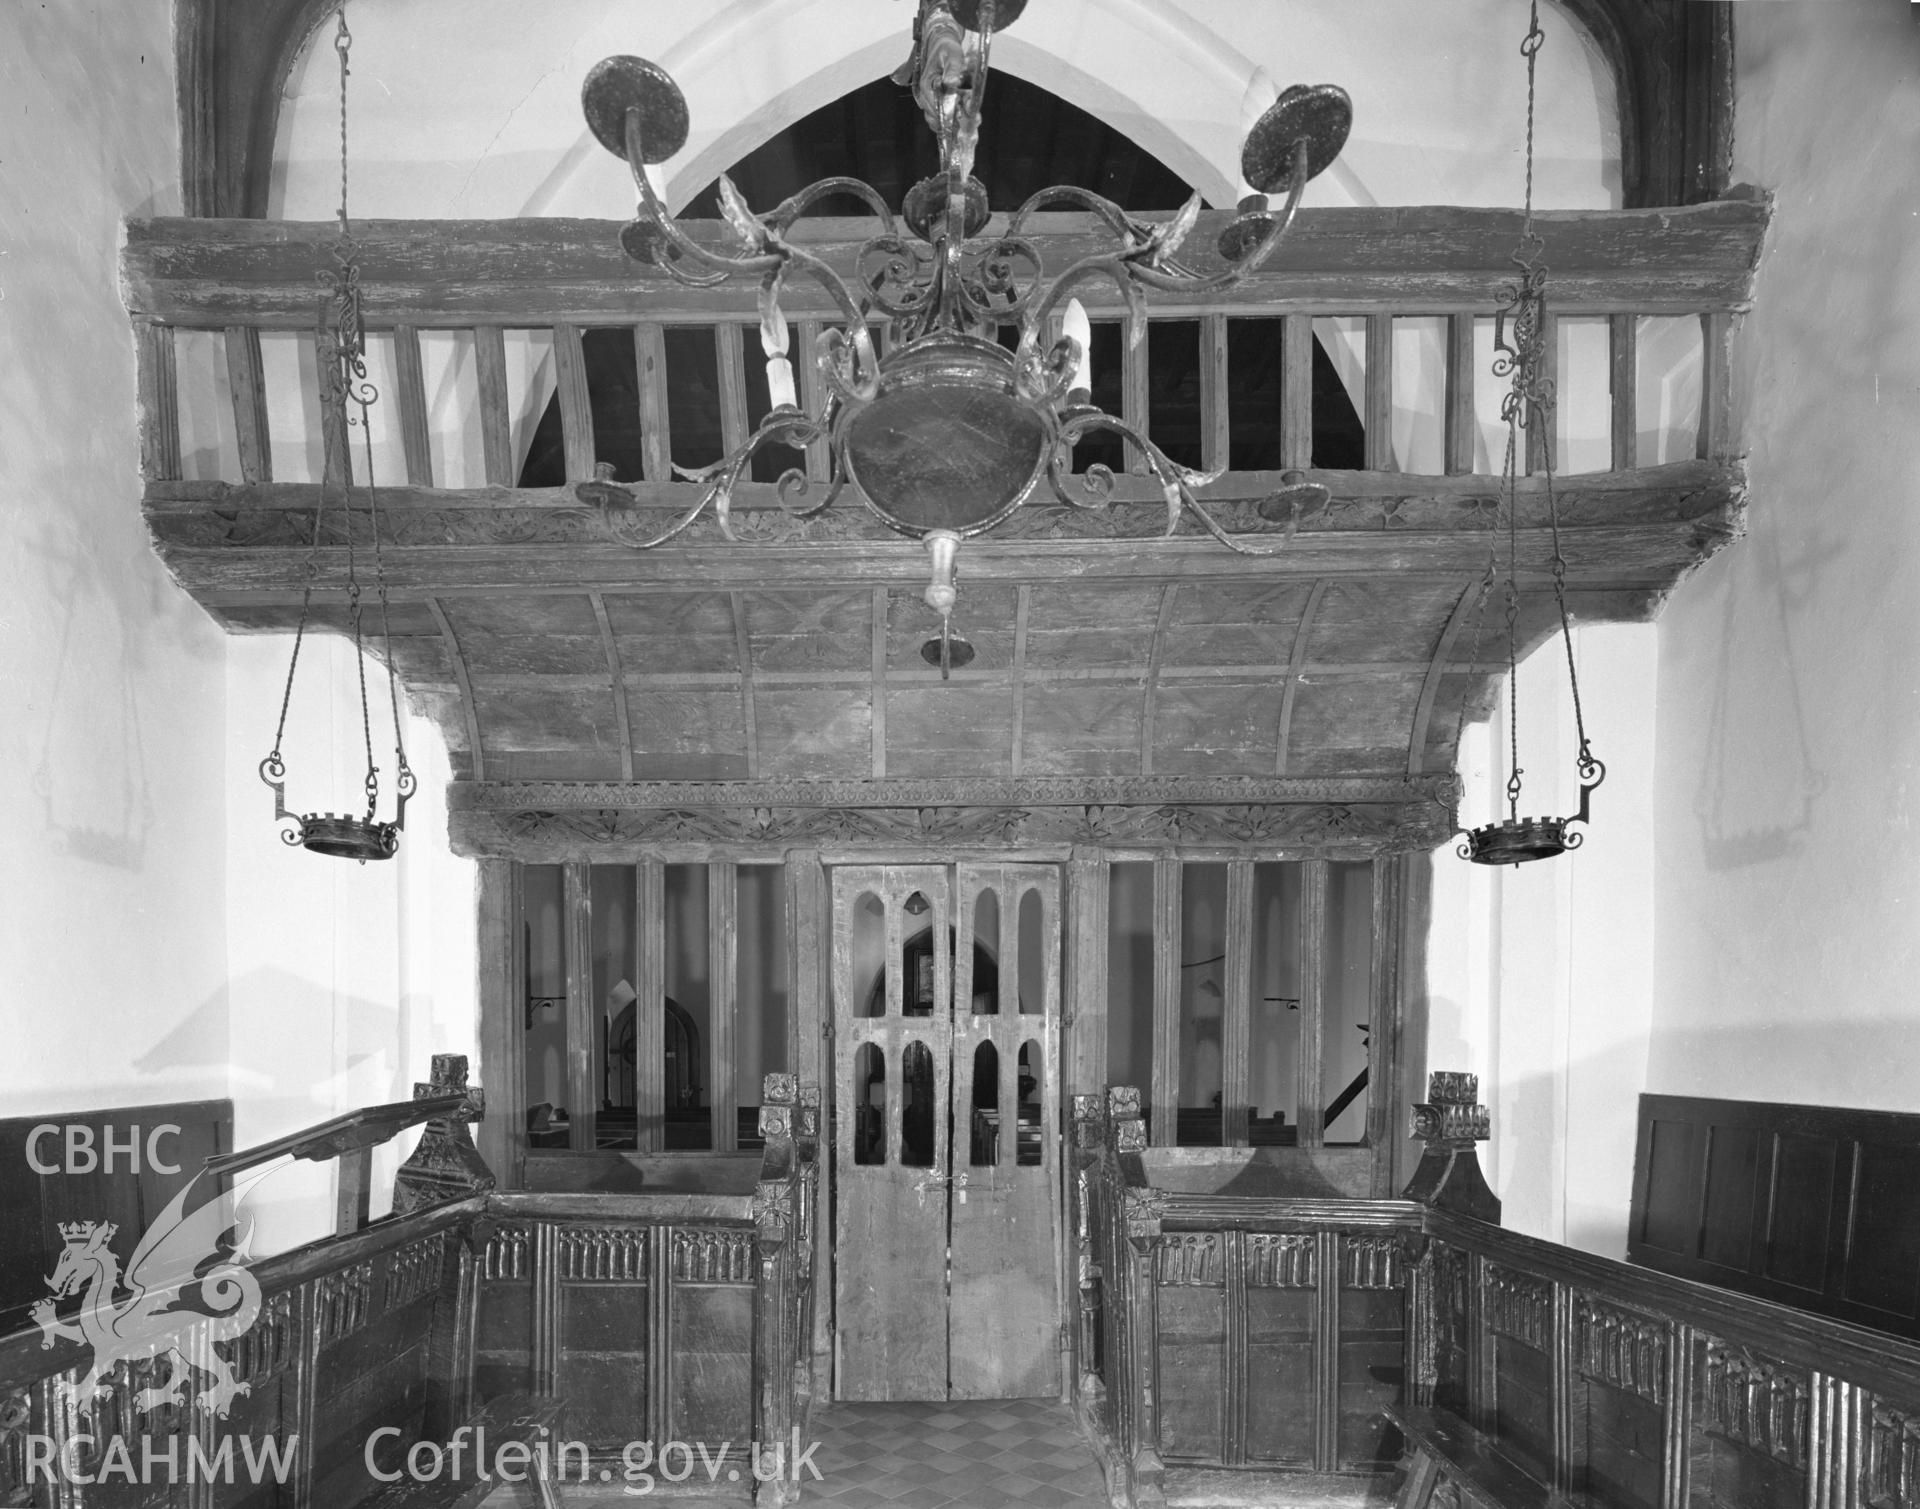 Black and white acetate negative showing interior view of Llaneilian Church.